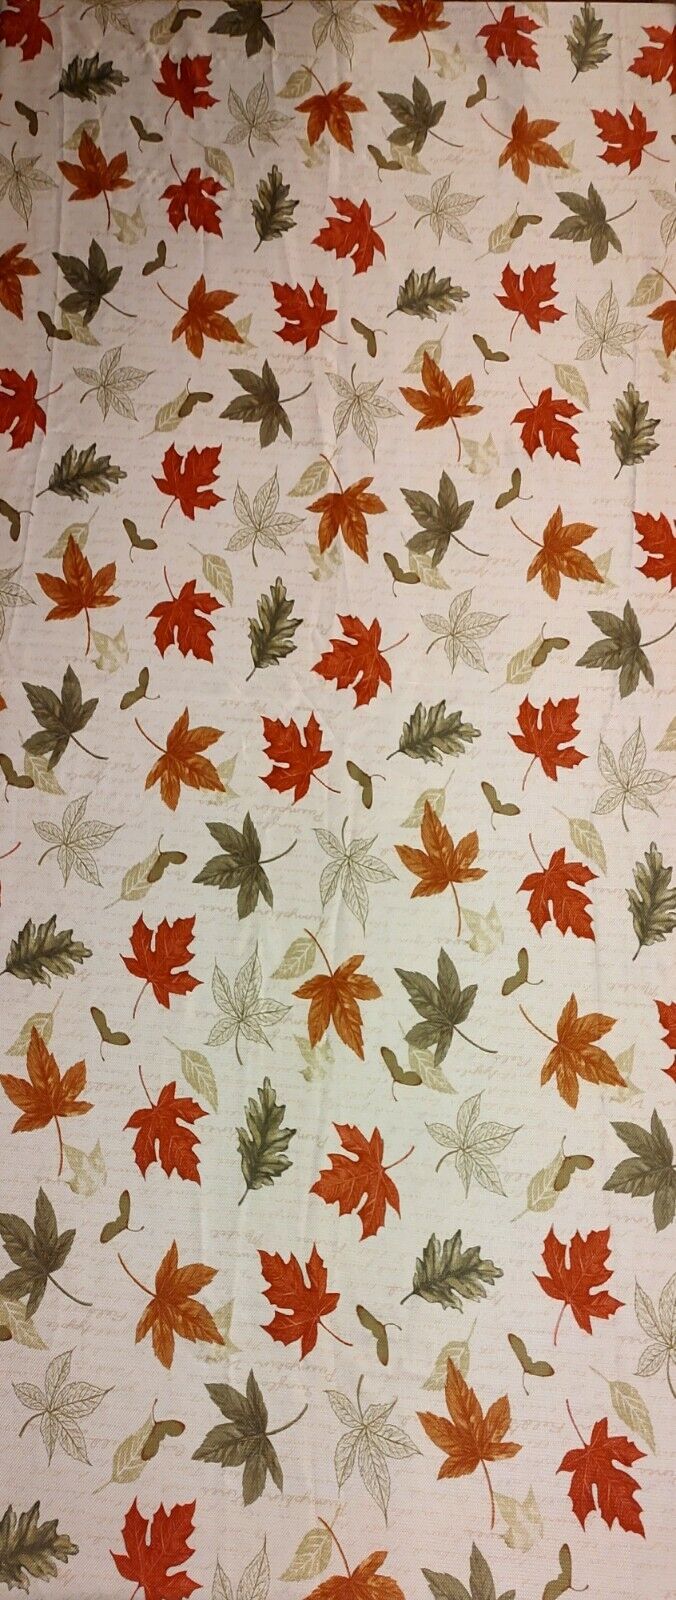 Vintage Fall Leaves Thanksgiving 101 x 59 in Large Family Gathering Tablecloth